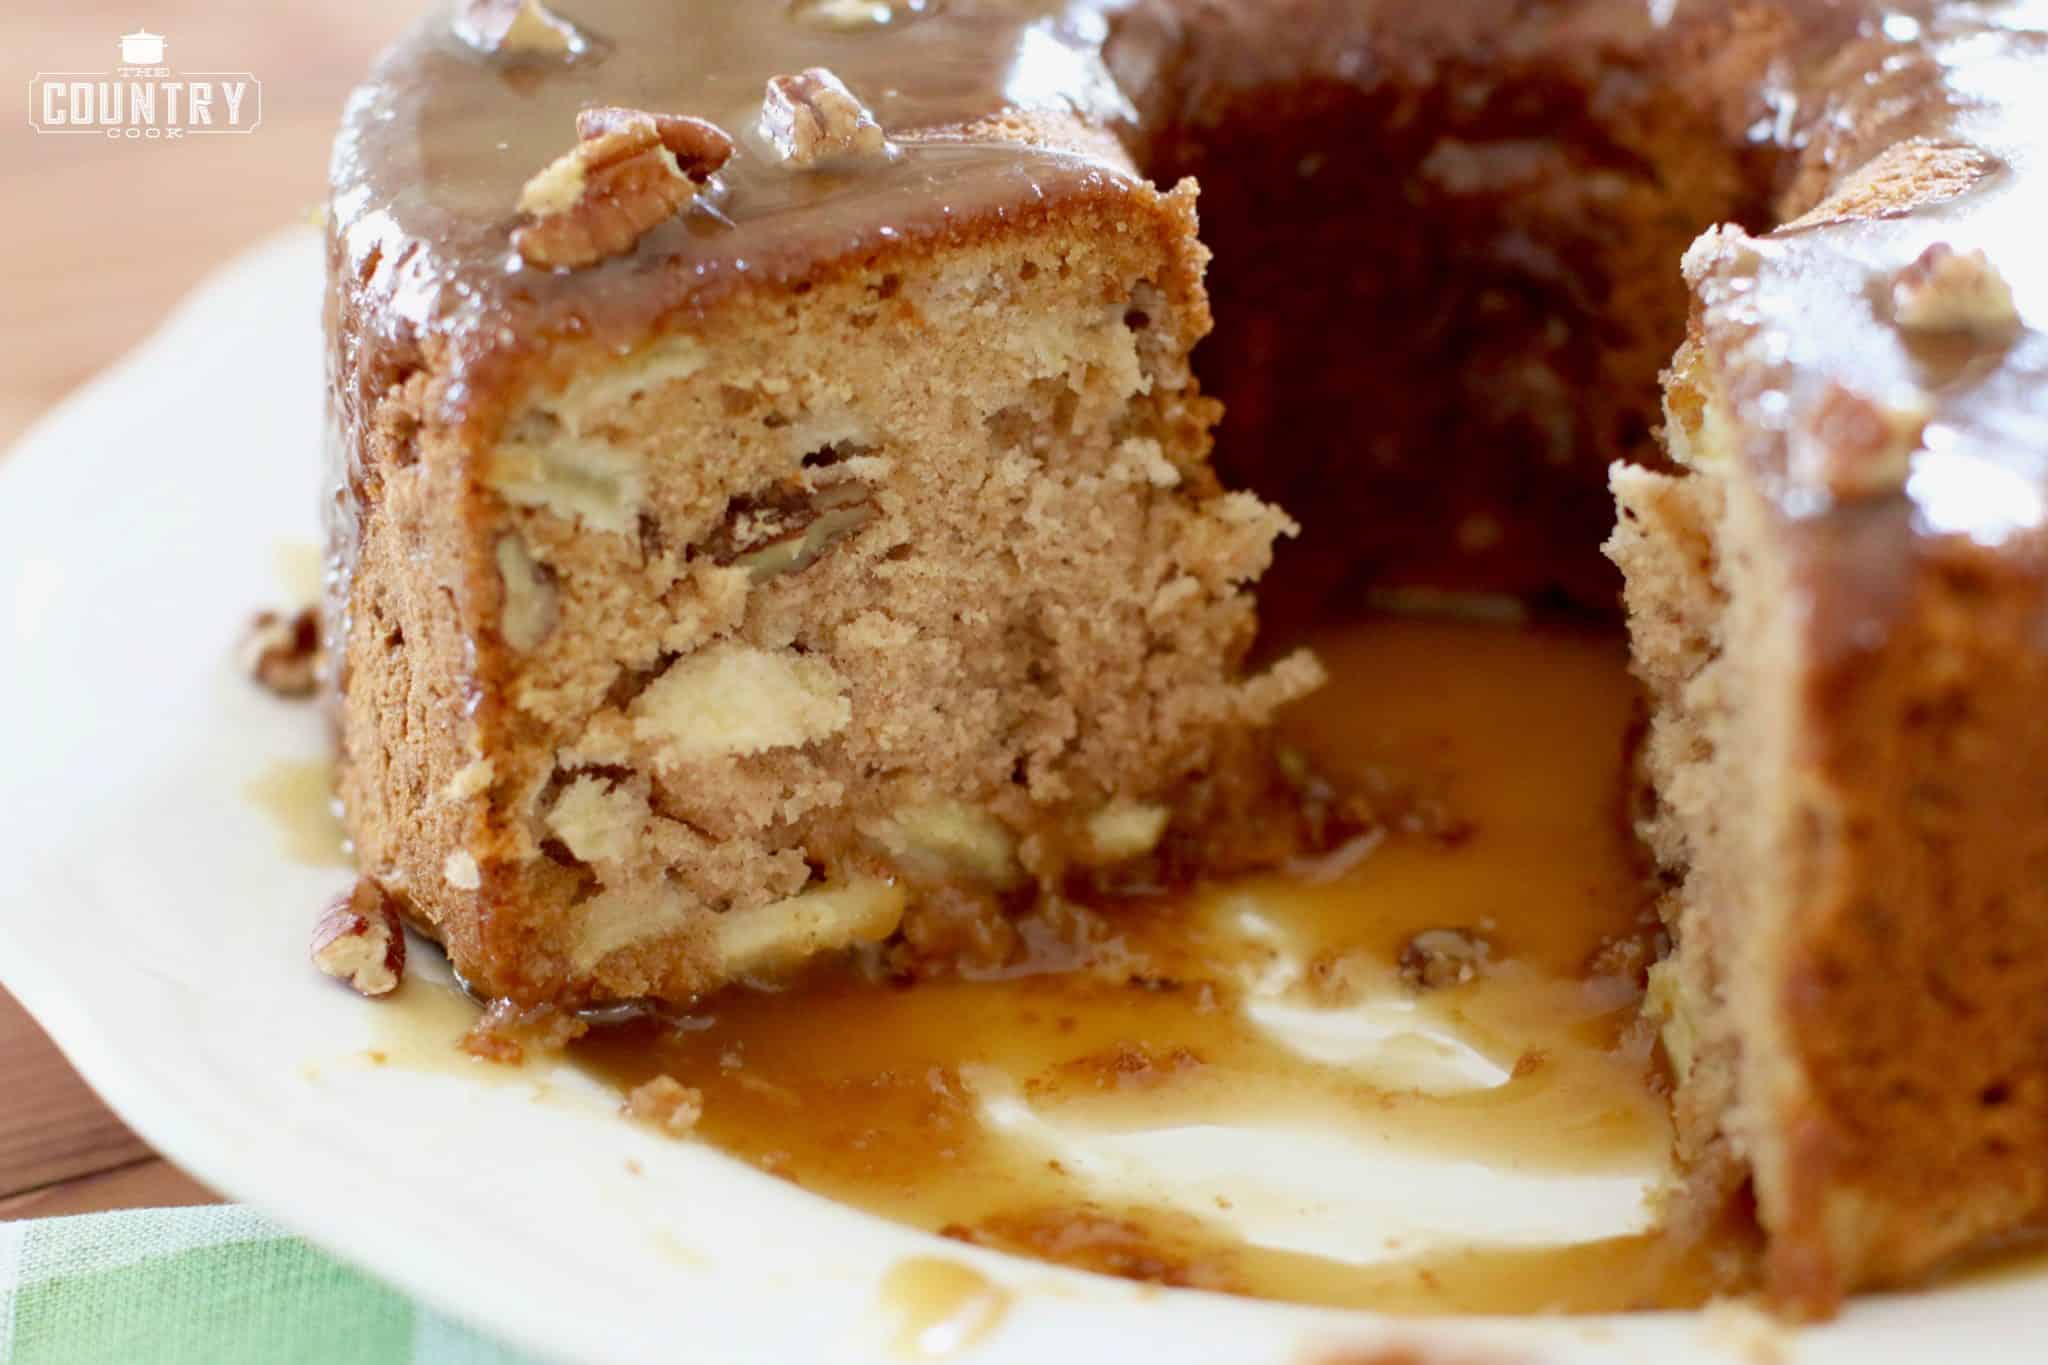 homemade apple cake with caramel drizzle.